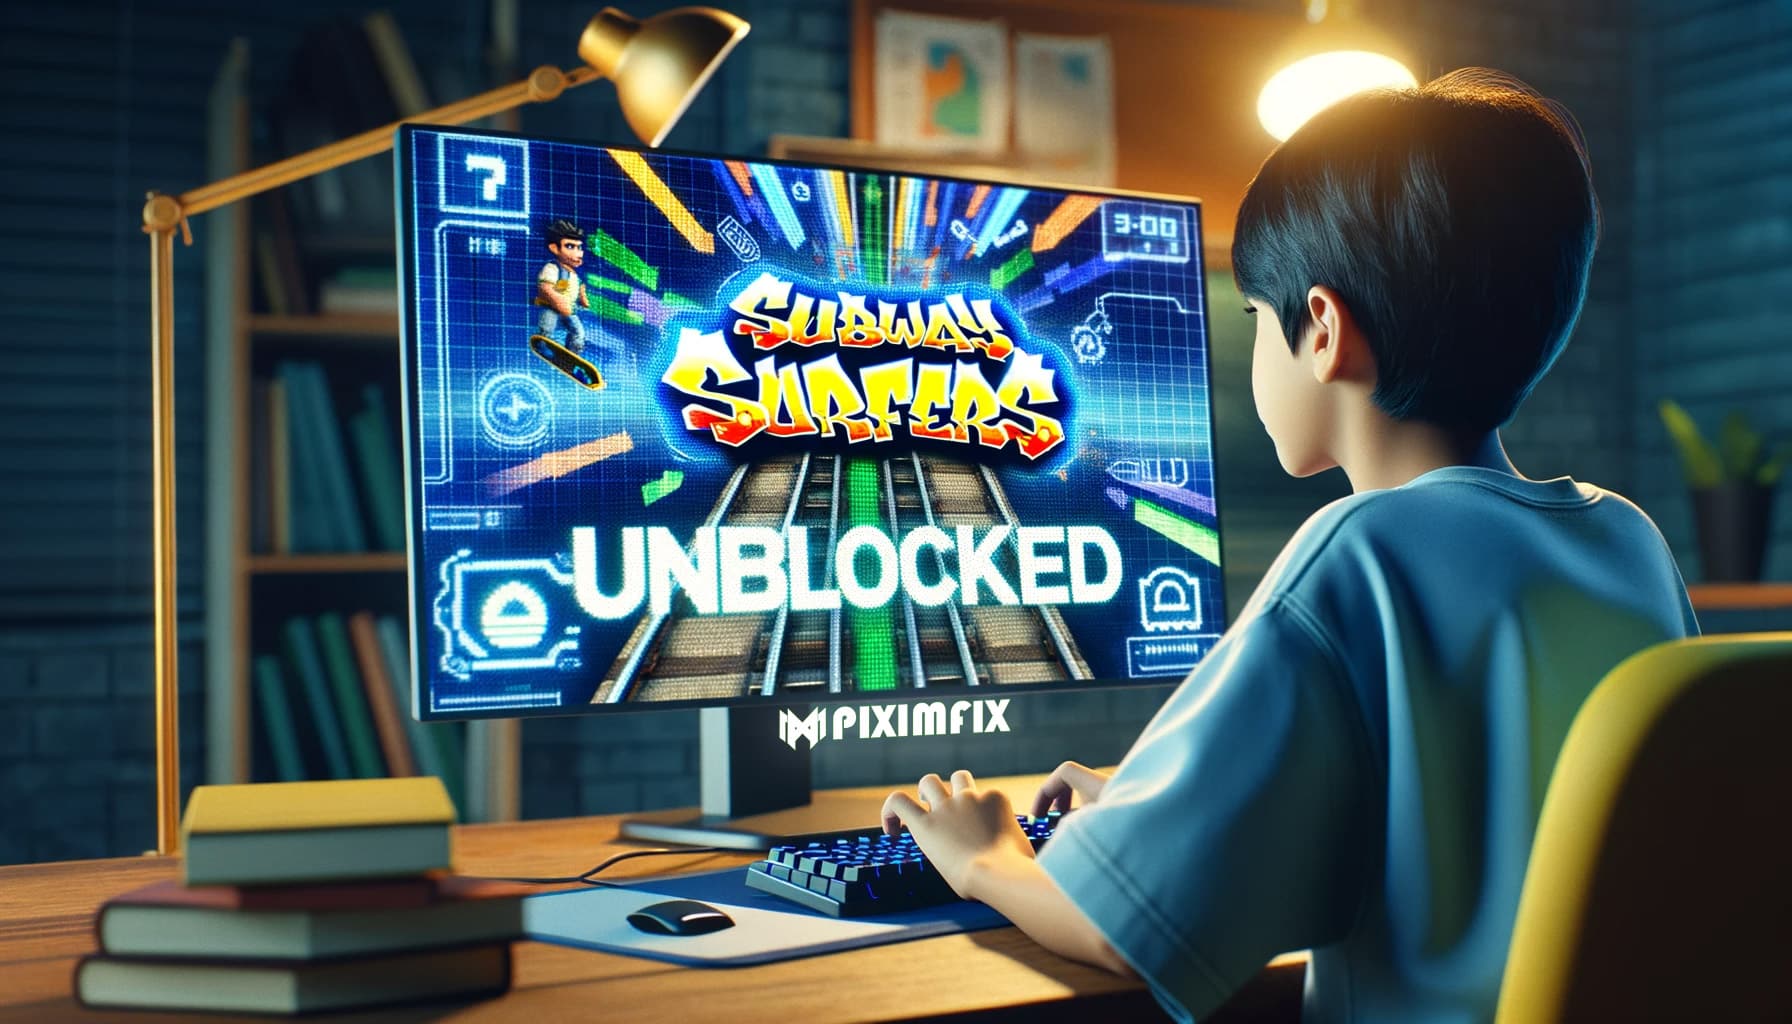 Subway Surfers Unblocked: Tips, Tricks, and Everything You Need to Know